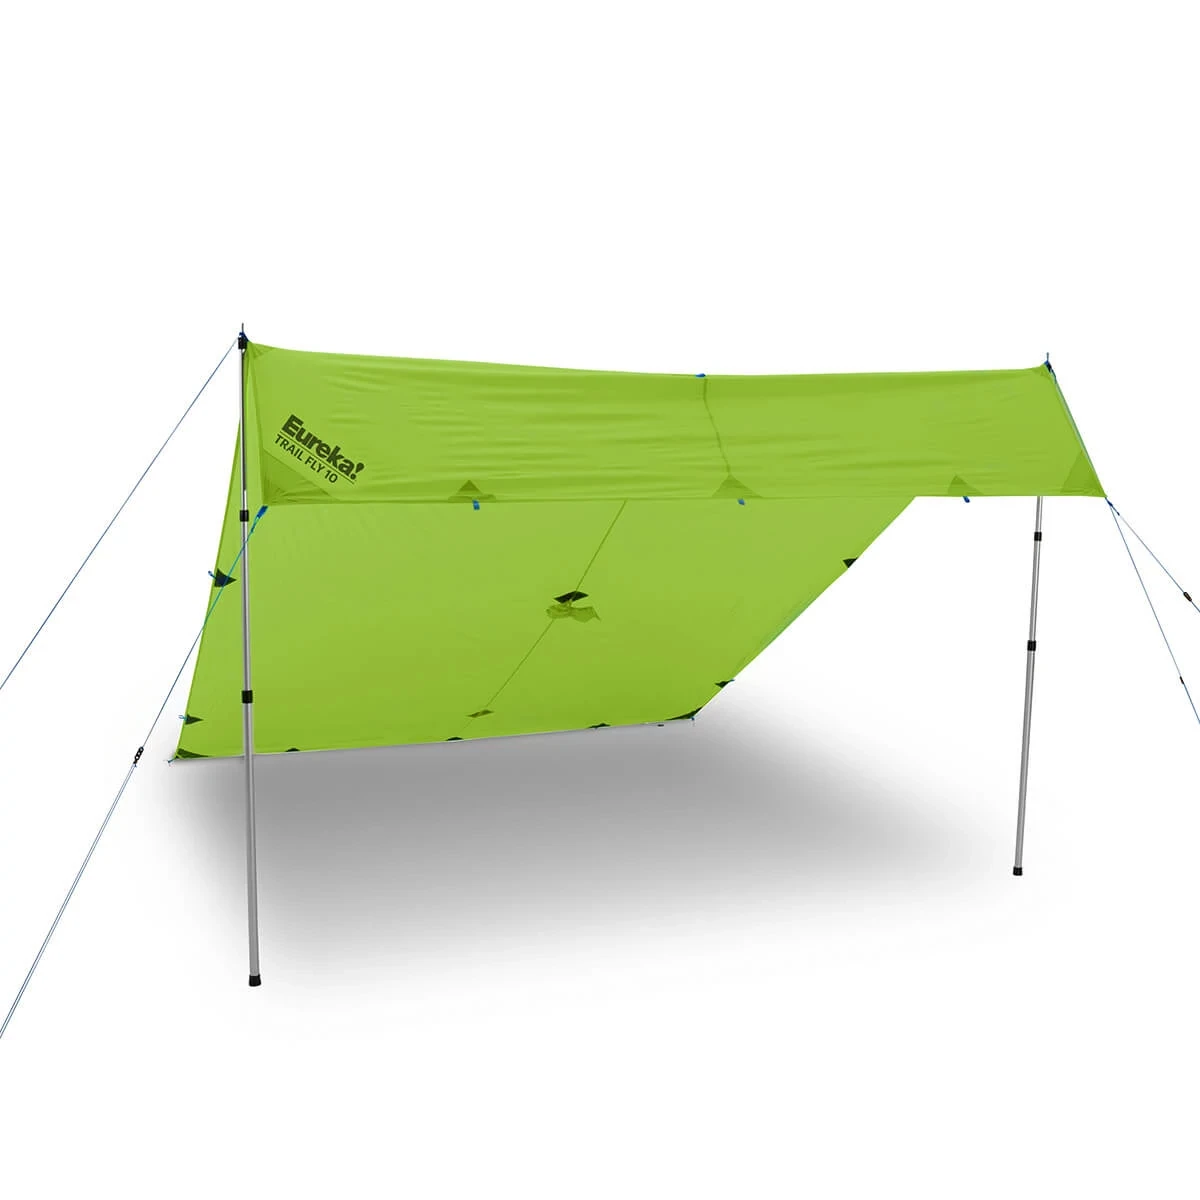 Trail Fly 10 pitch configuration option for shelter and shade. Poles sold separately.